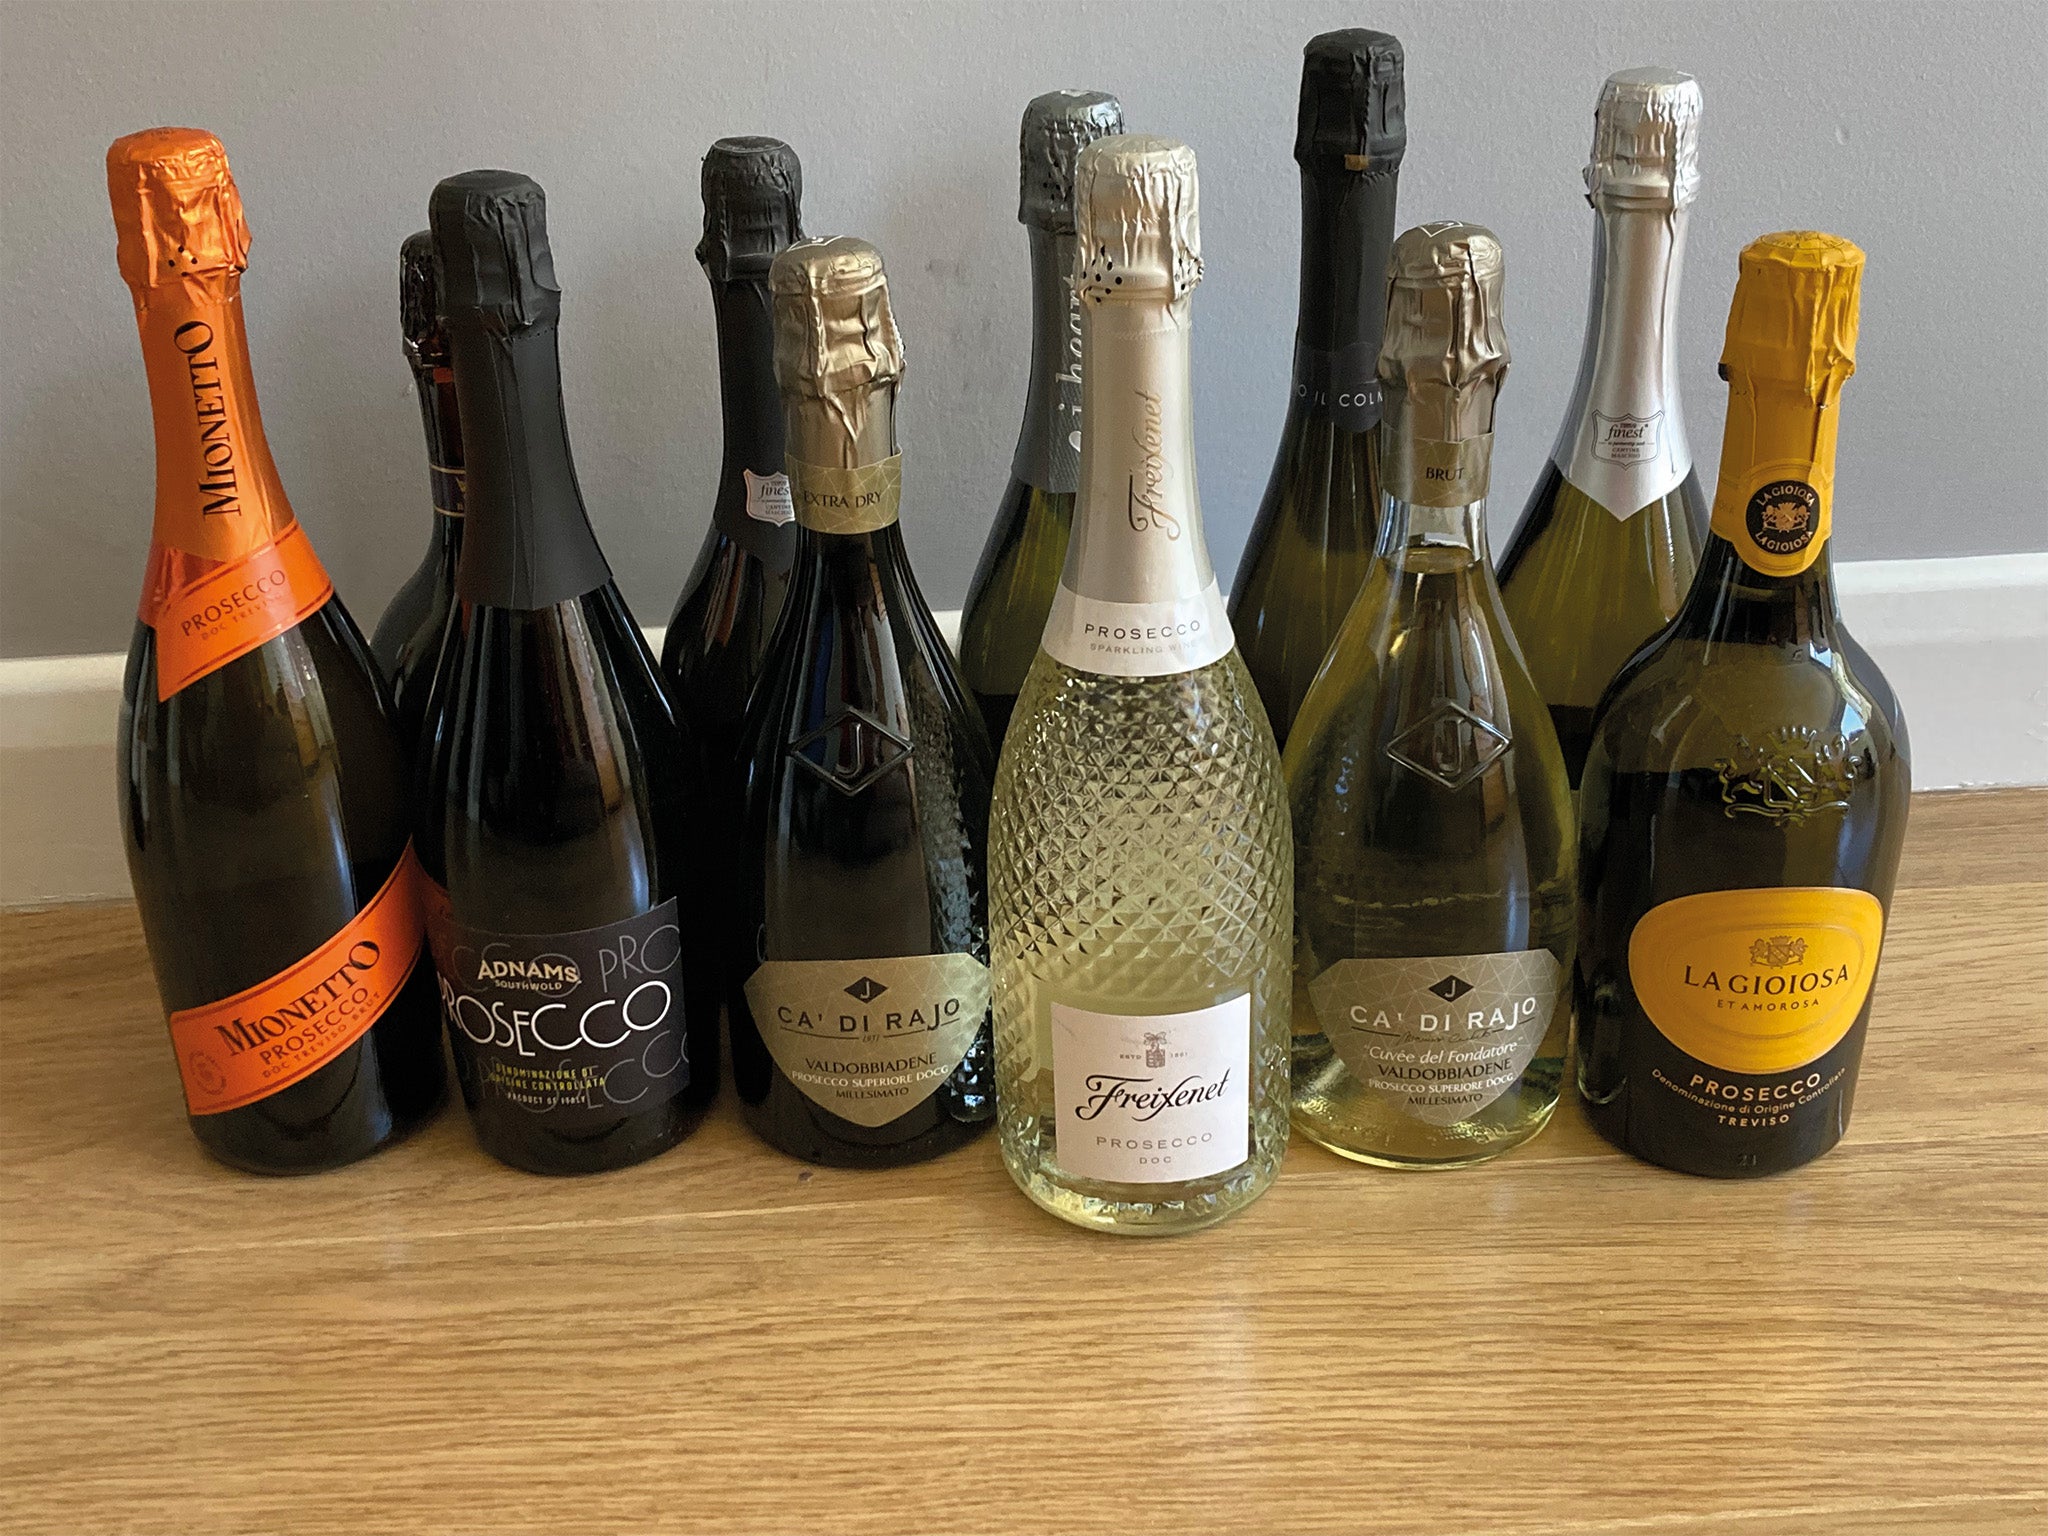 We reviewed each bottle of fizz for aromas, bubbles and flavours